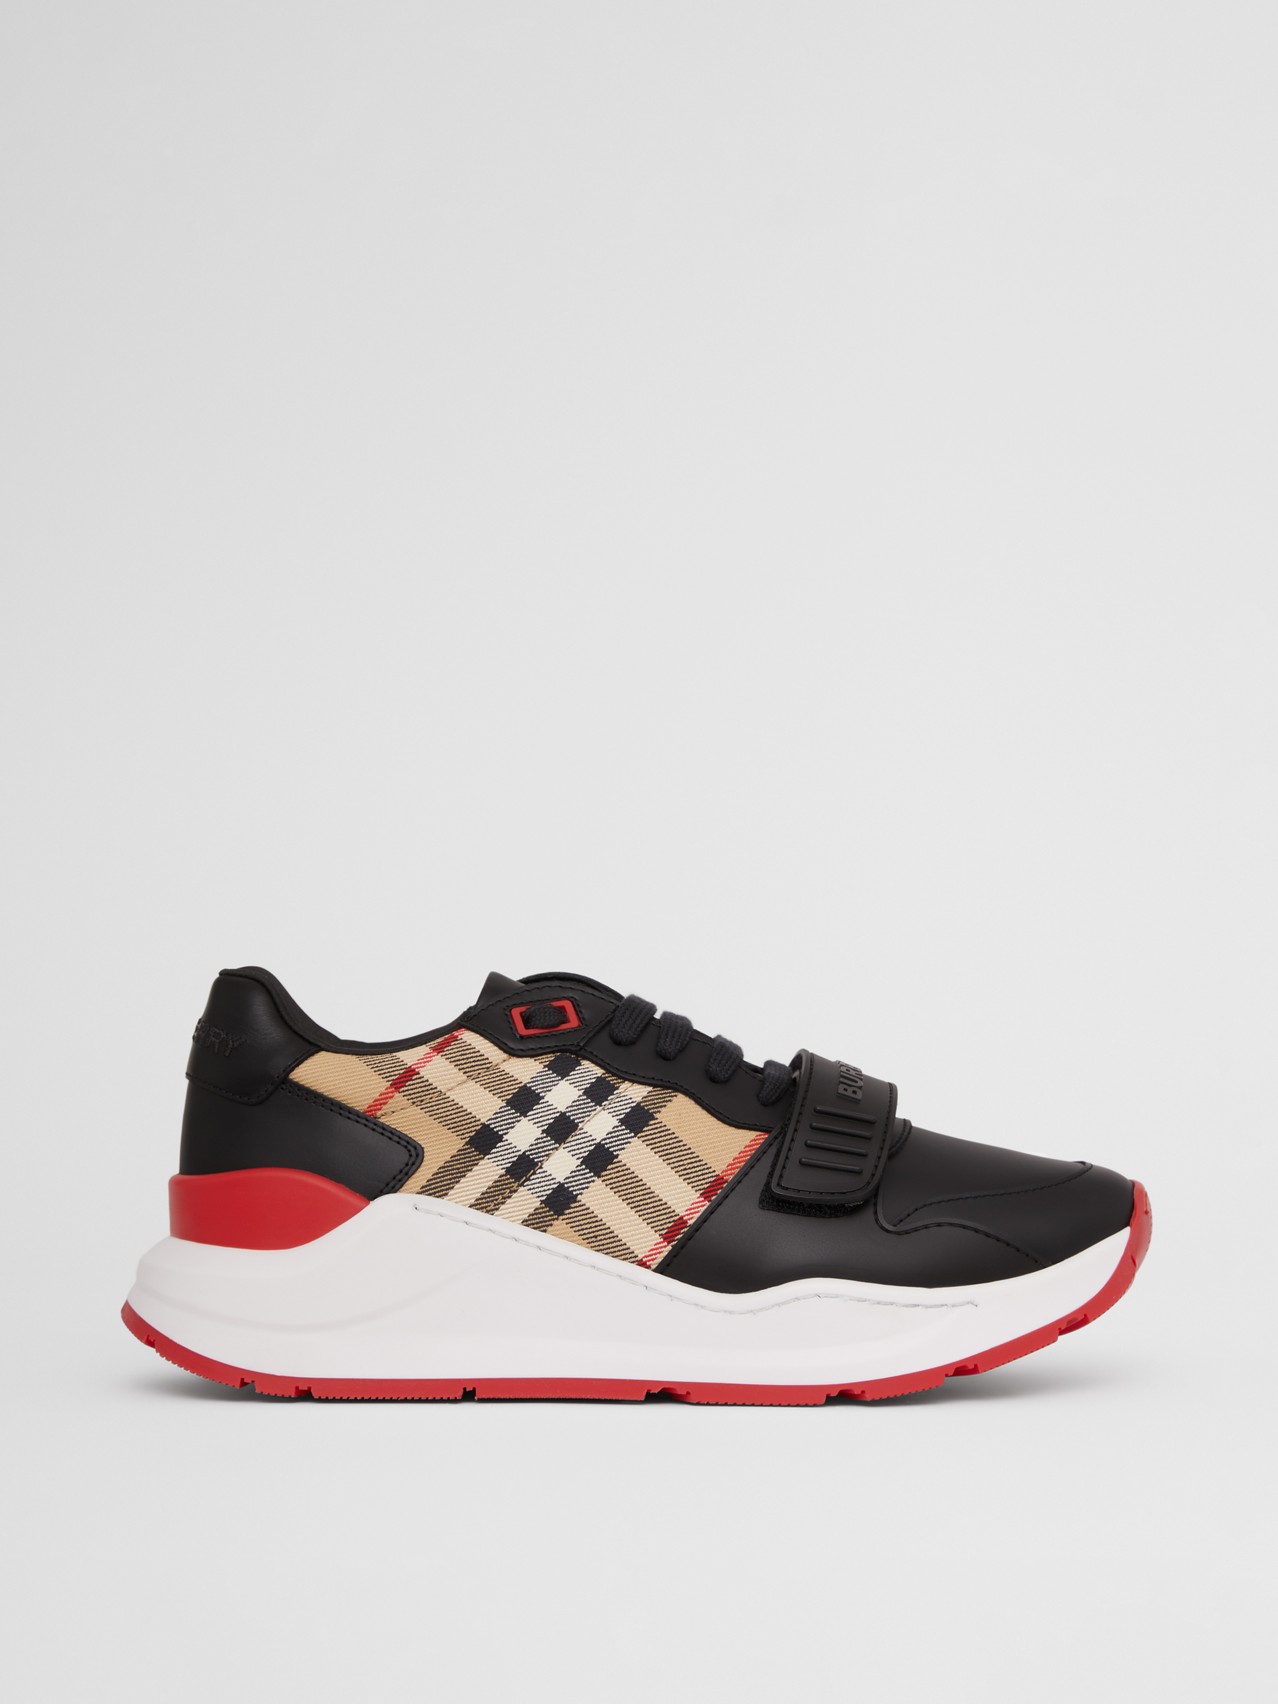 Leather and Vintage Check Cotton Sneakers by Burberry, available on burberry.com for $570 Gigi Hadid Shoes SIMILAR PRODUCT